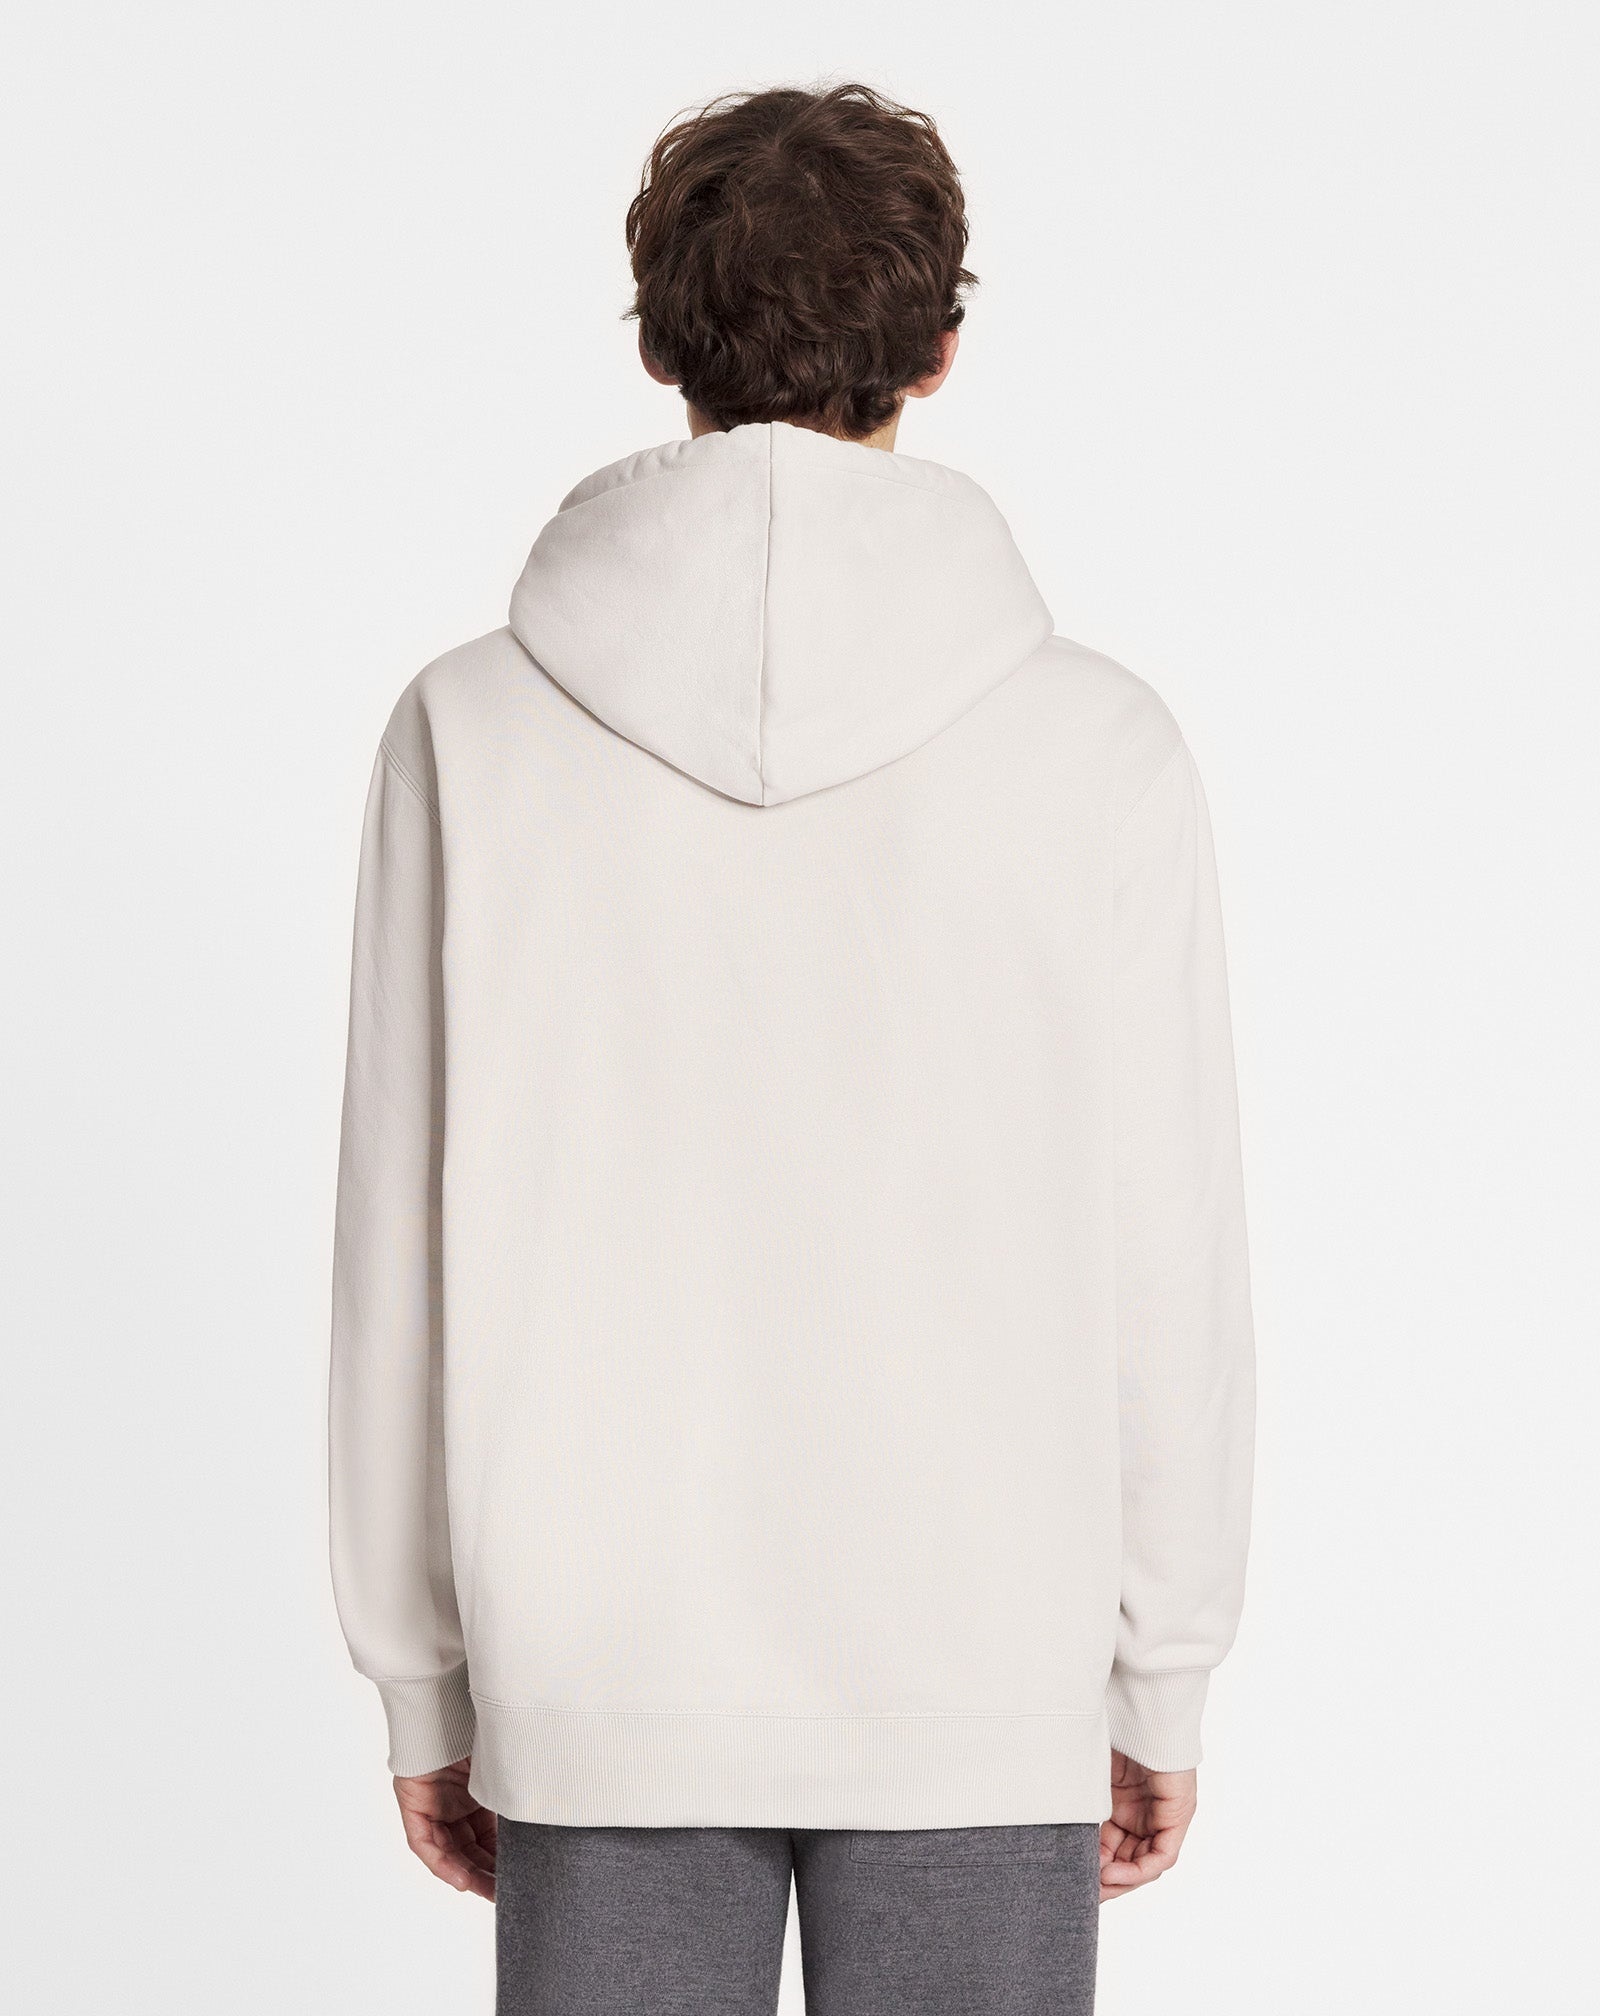 OVERSIZED EMBROIDERED LANVIN PARIS HOODIE - 5